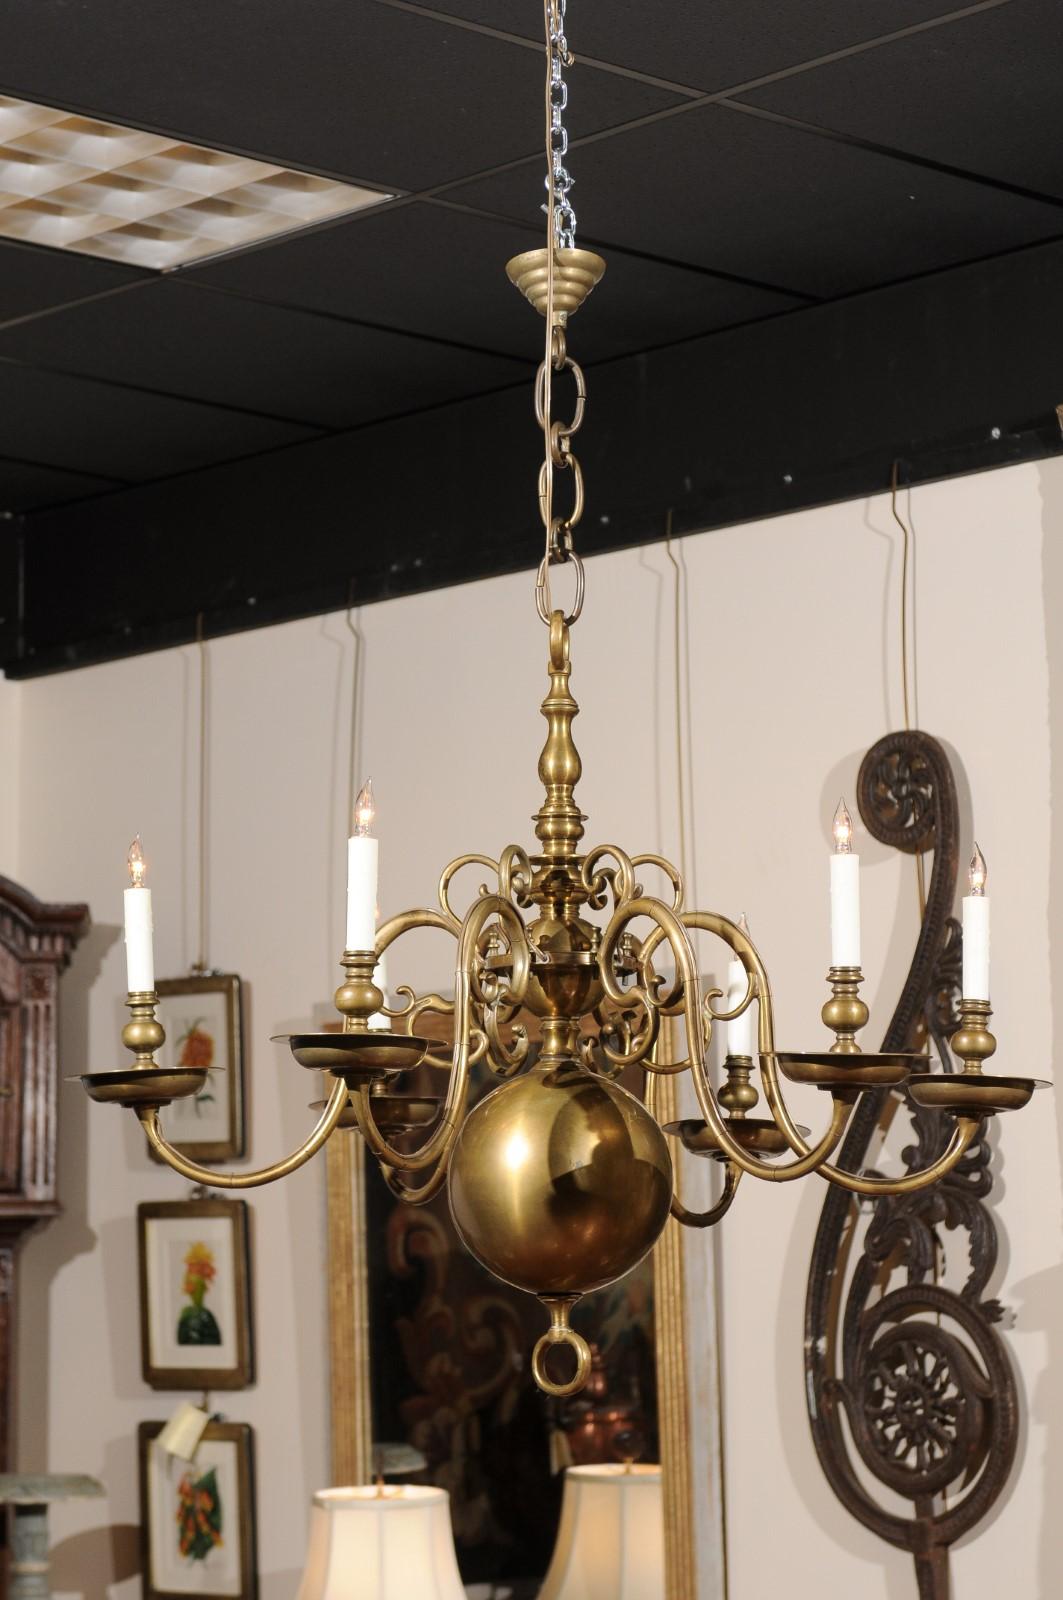 The pair of Dutch Colonial chandeliers with 6 scrolled decorated arms and bobeches, center bublbous column, and terminating large ball with ring finial. The chandeliers recently wired for USA electricity.

 